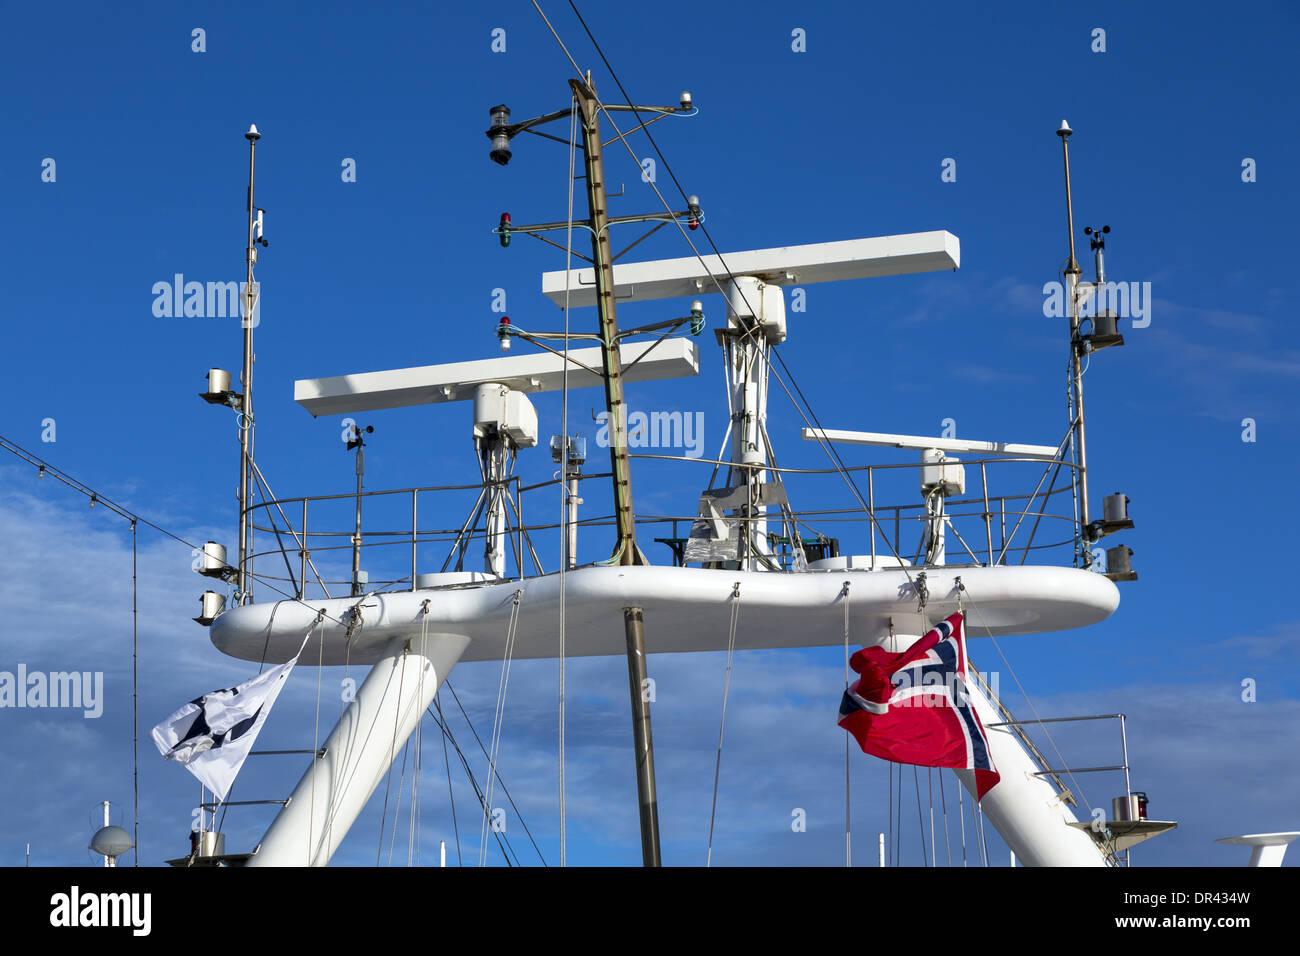 Navigation and radar equipment and antenna on a Radar Mast tower of a luxury cruise ship flying the flag of Norway Stock Photo